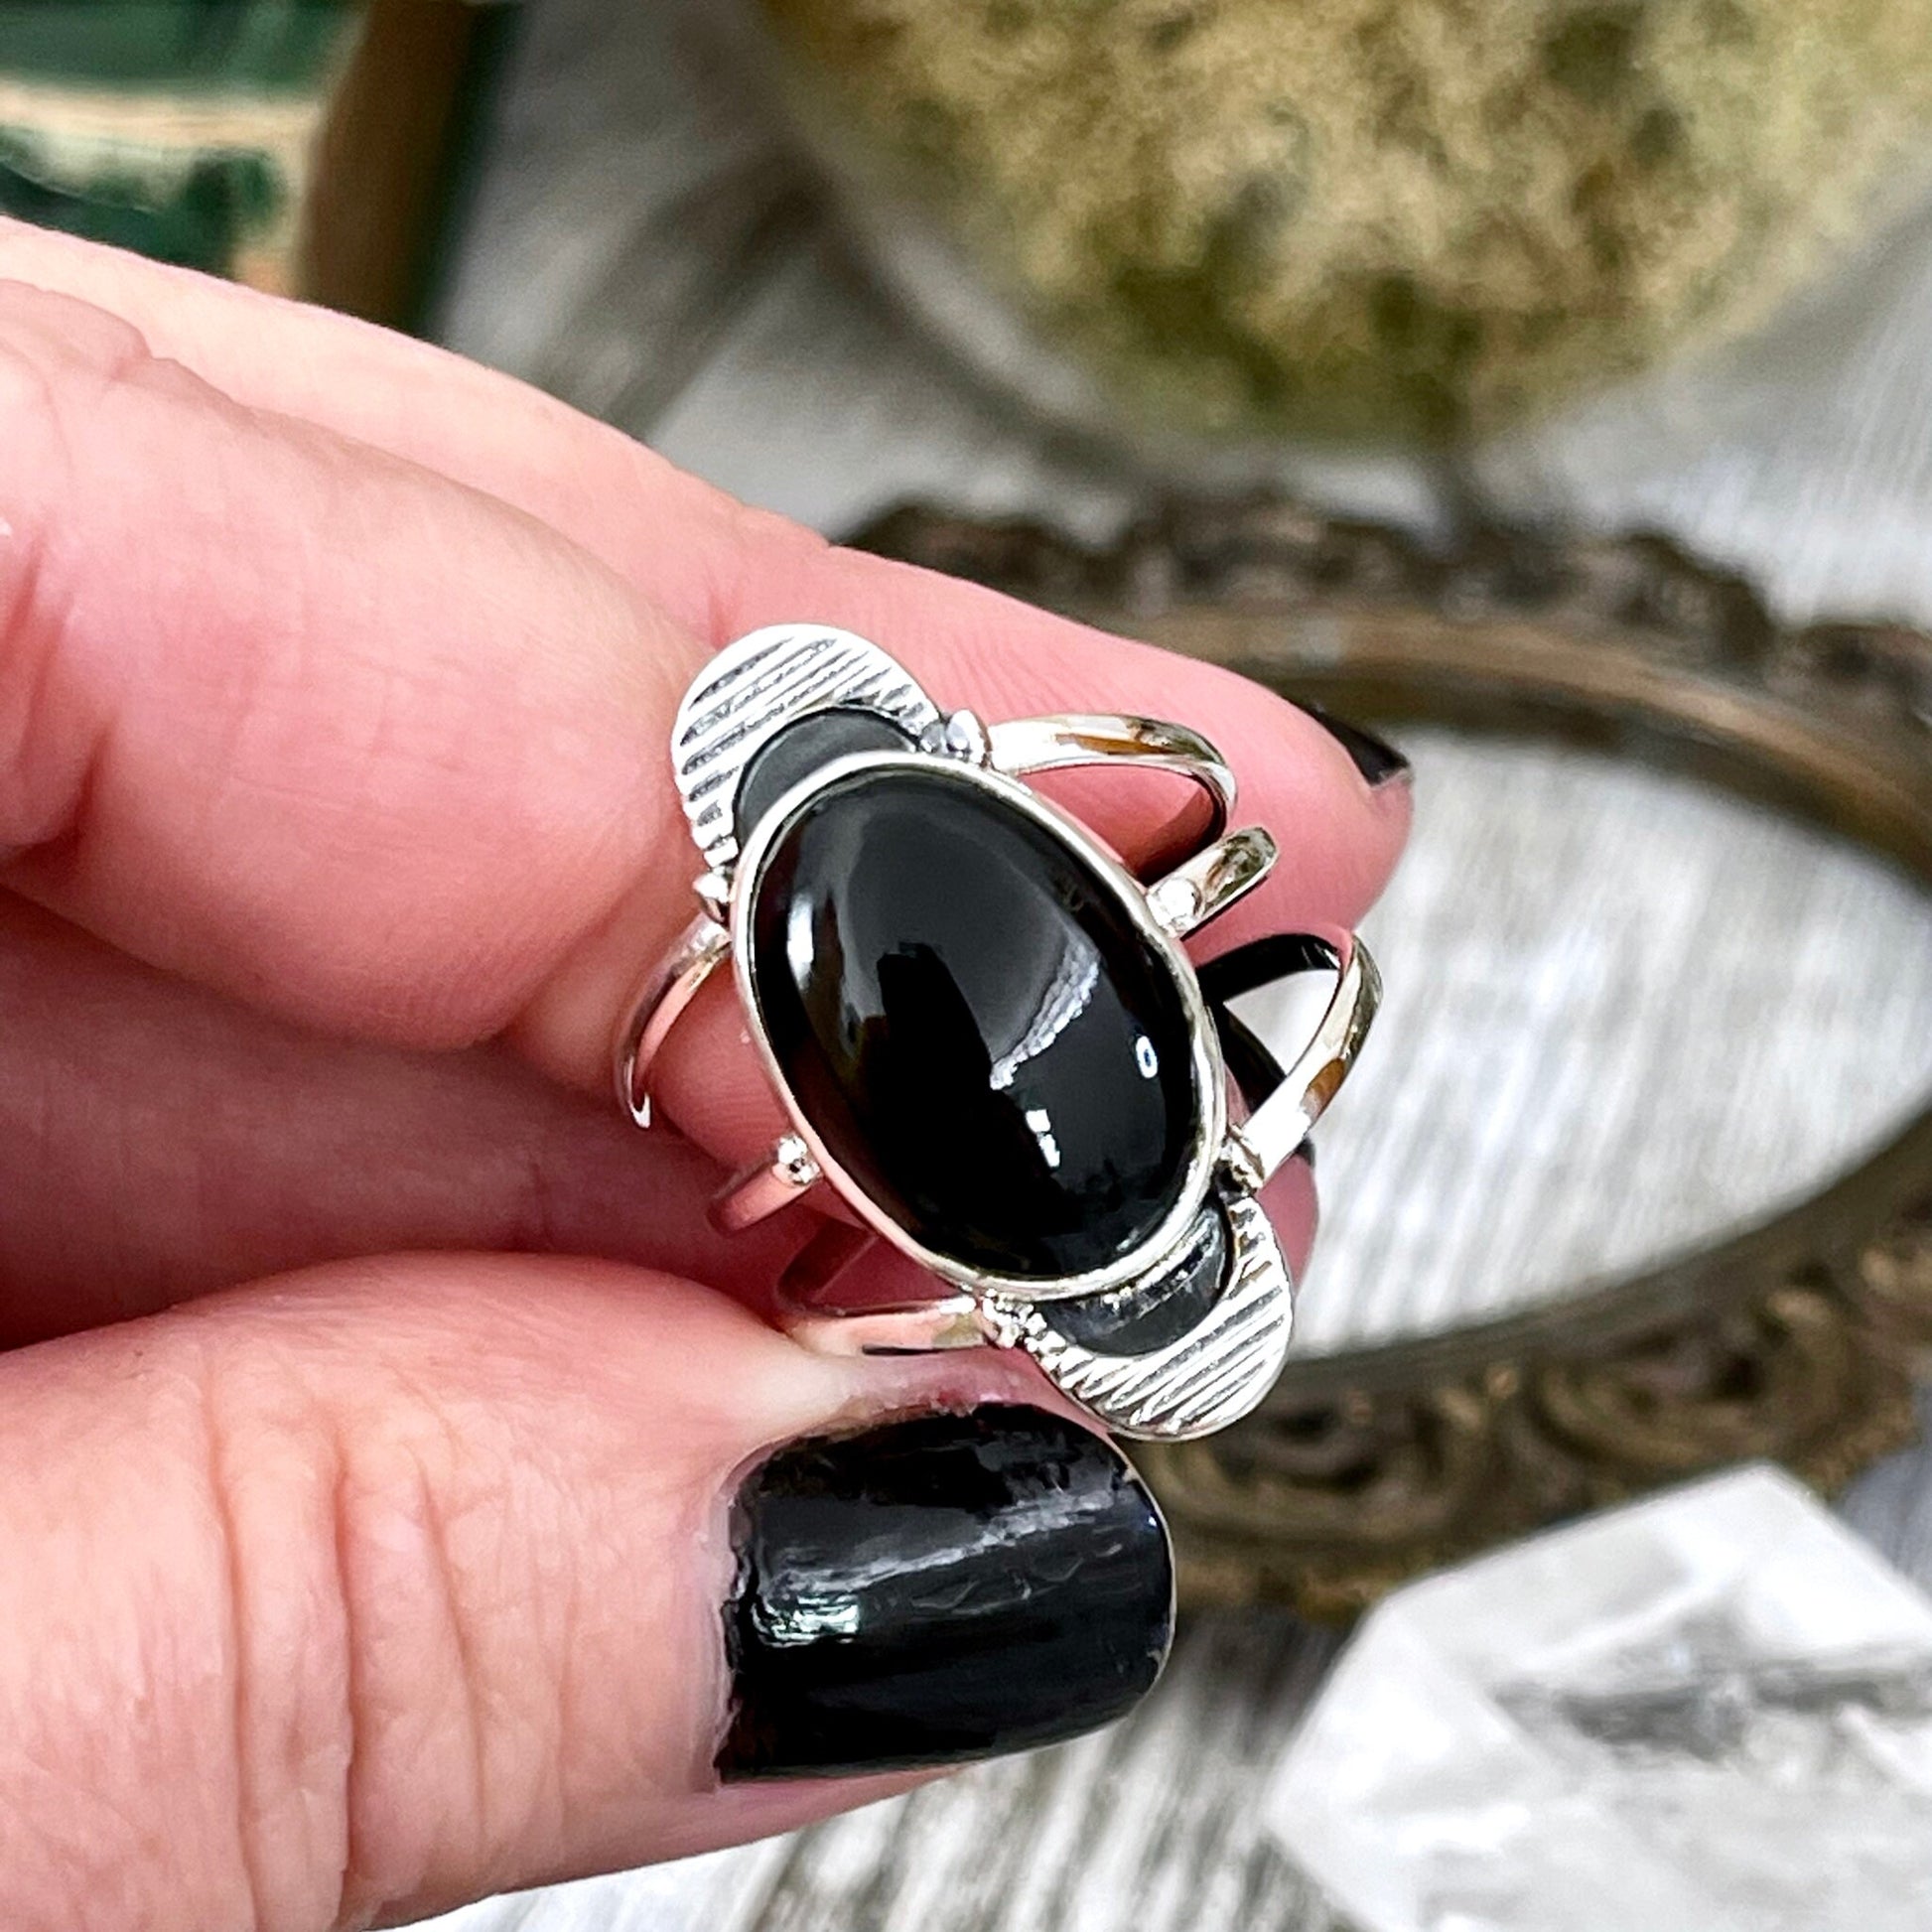 Black Onyx Ring, Black Stone Ring, Bohemian Jewelry, Bohemian Ring, boho jewelry, boho ring, crystal ring, Etsy ID: 1398368019, FOXLARK- RINGS, Gothic Jewelry, gypsy ring, Jewelry, Moon Jewelry, Moon Ring, Rings, Statement Rings, Witch Jewelry, Witchy Jew